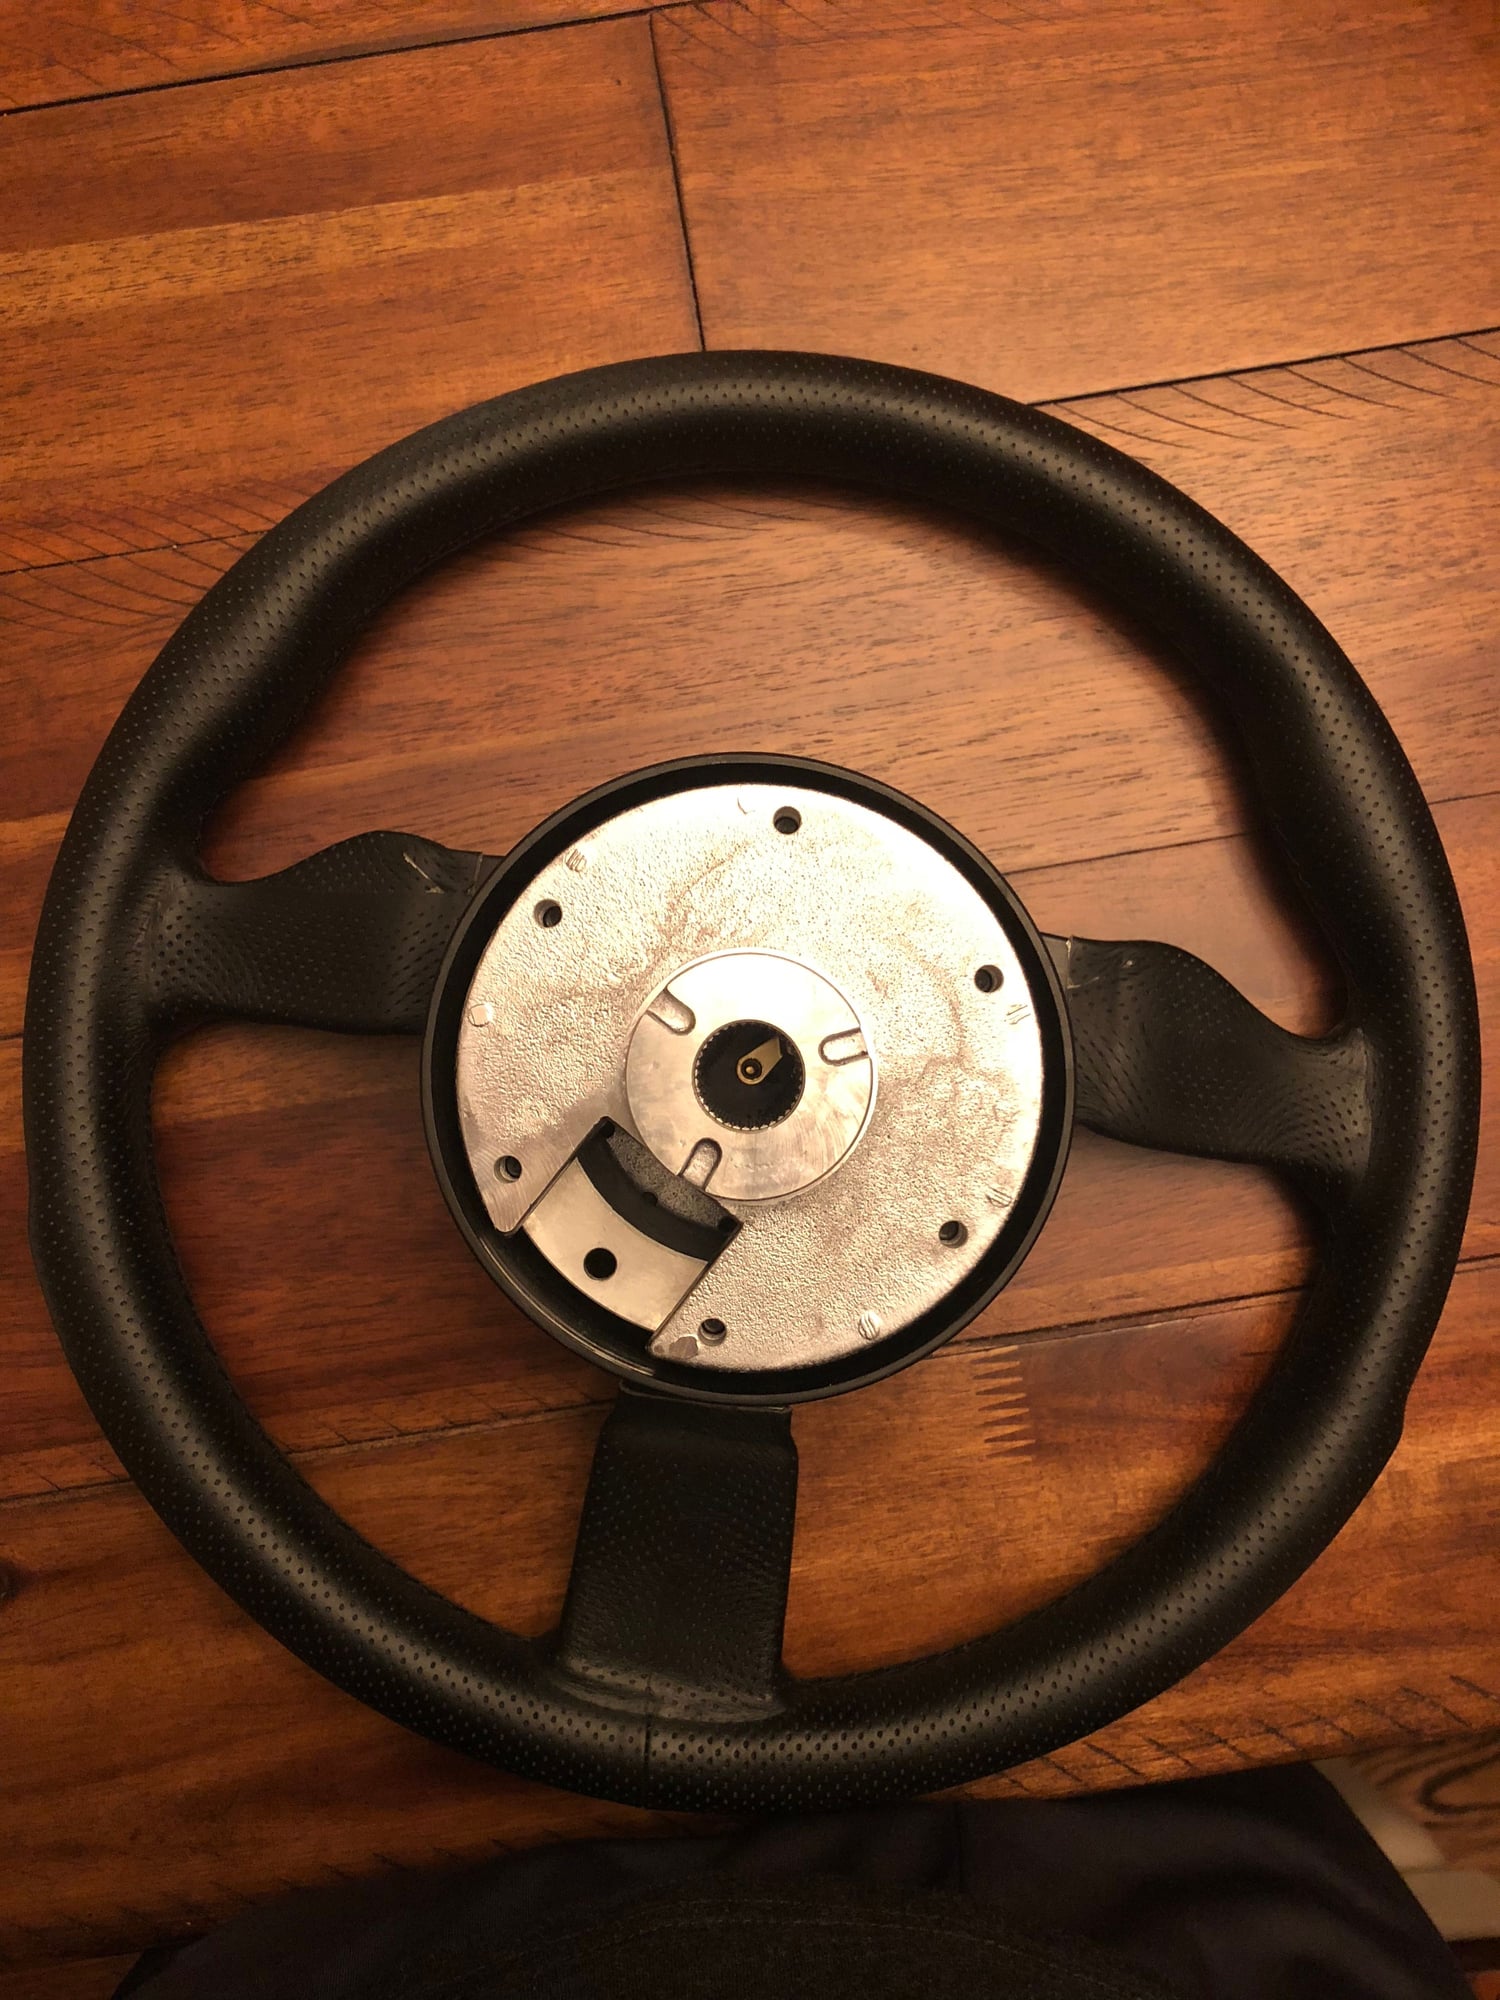 Steering/Suspension - Nardi-Personal Grinta steering wheel with Works Bell JDM boss kit - Used - 2003 to 2006 Mitsubishi Lancer Evolution - Staten Island, NY 10308, United States